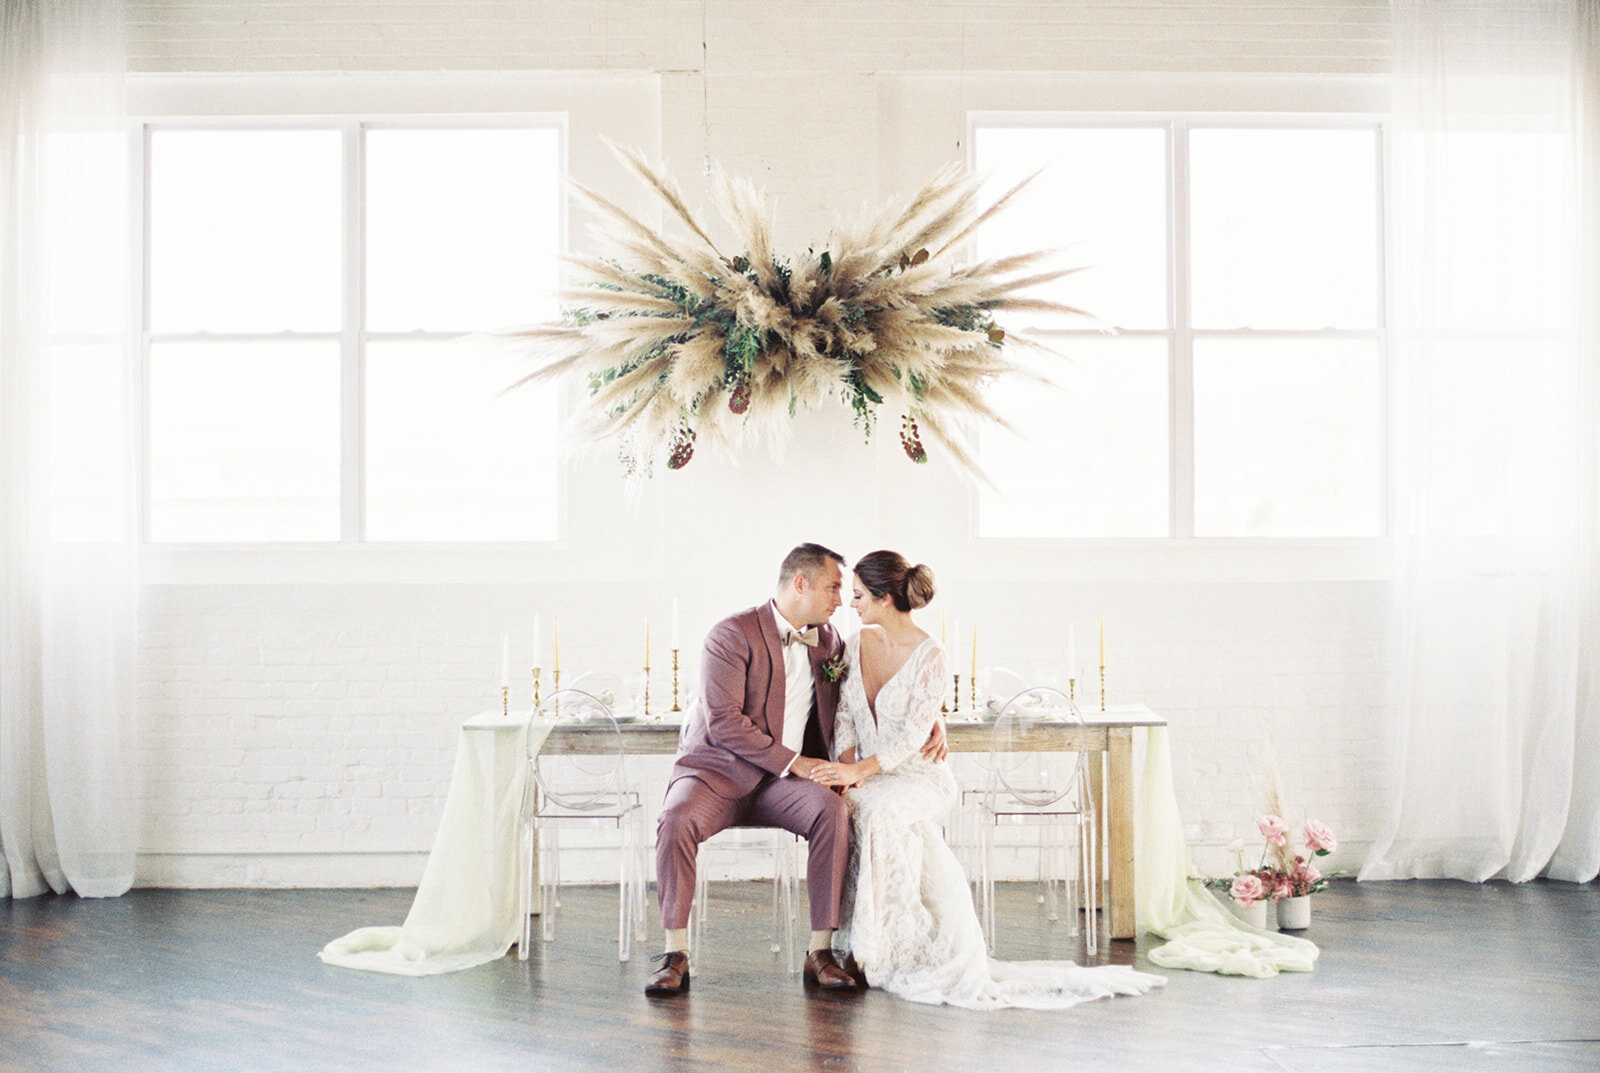 Boho minimalist wedding inspiration from Pennsylvania wedding photographer Mallory McClure at Reading Artworks. Purple an gold accents mixing vintage with modern details.